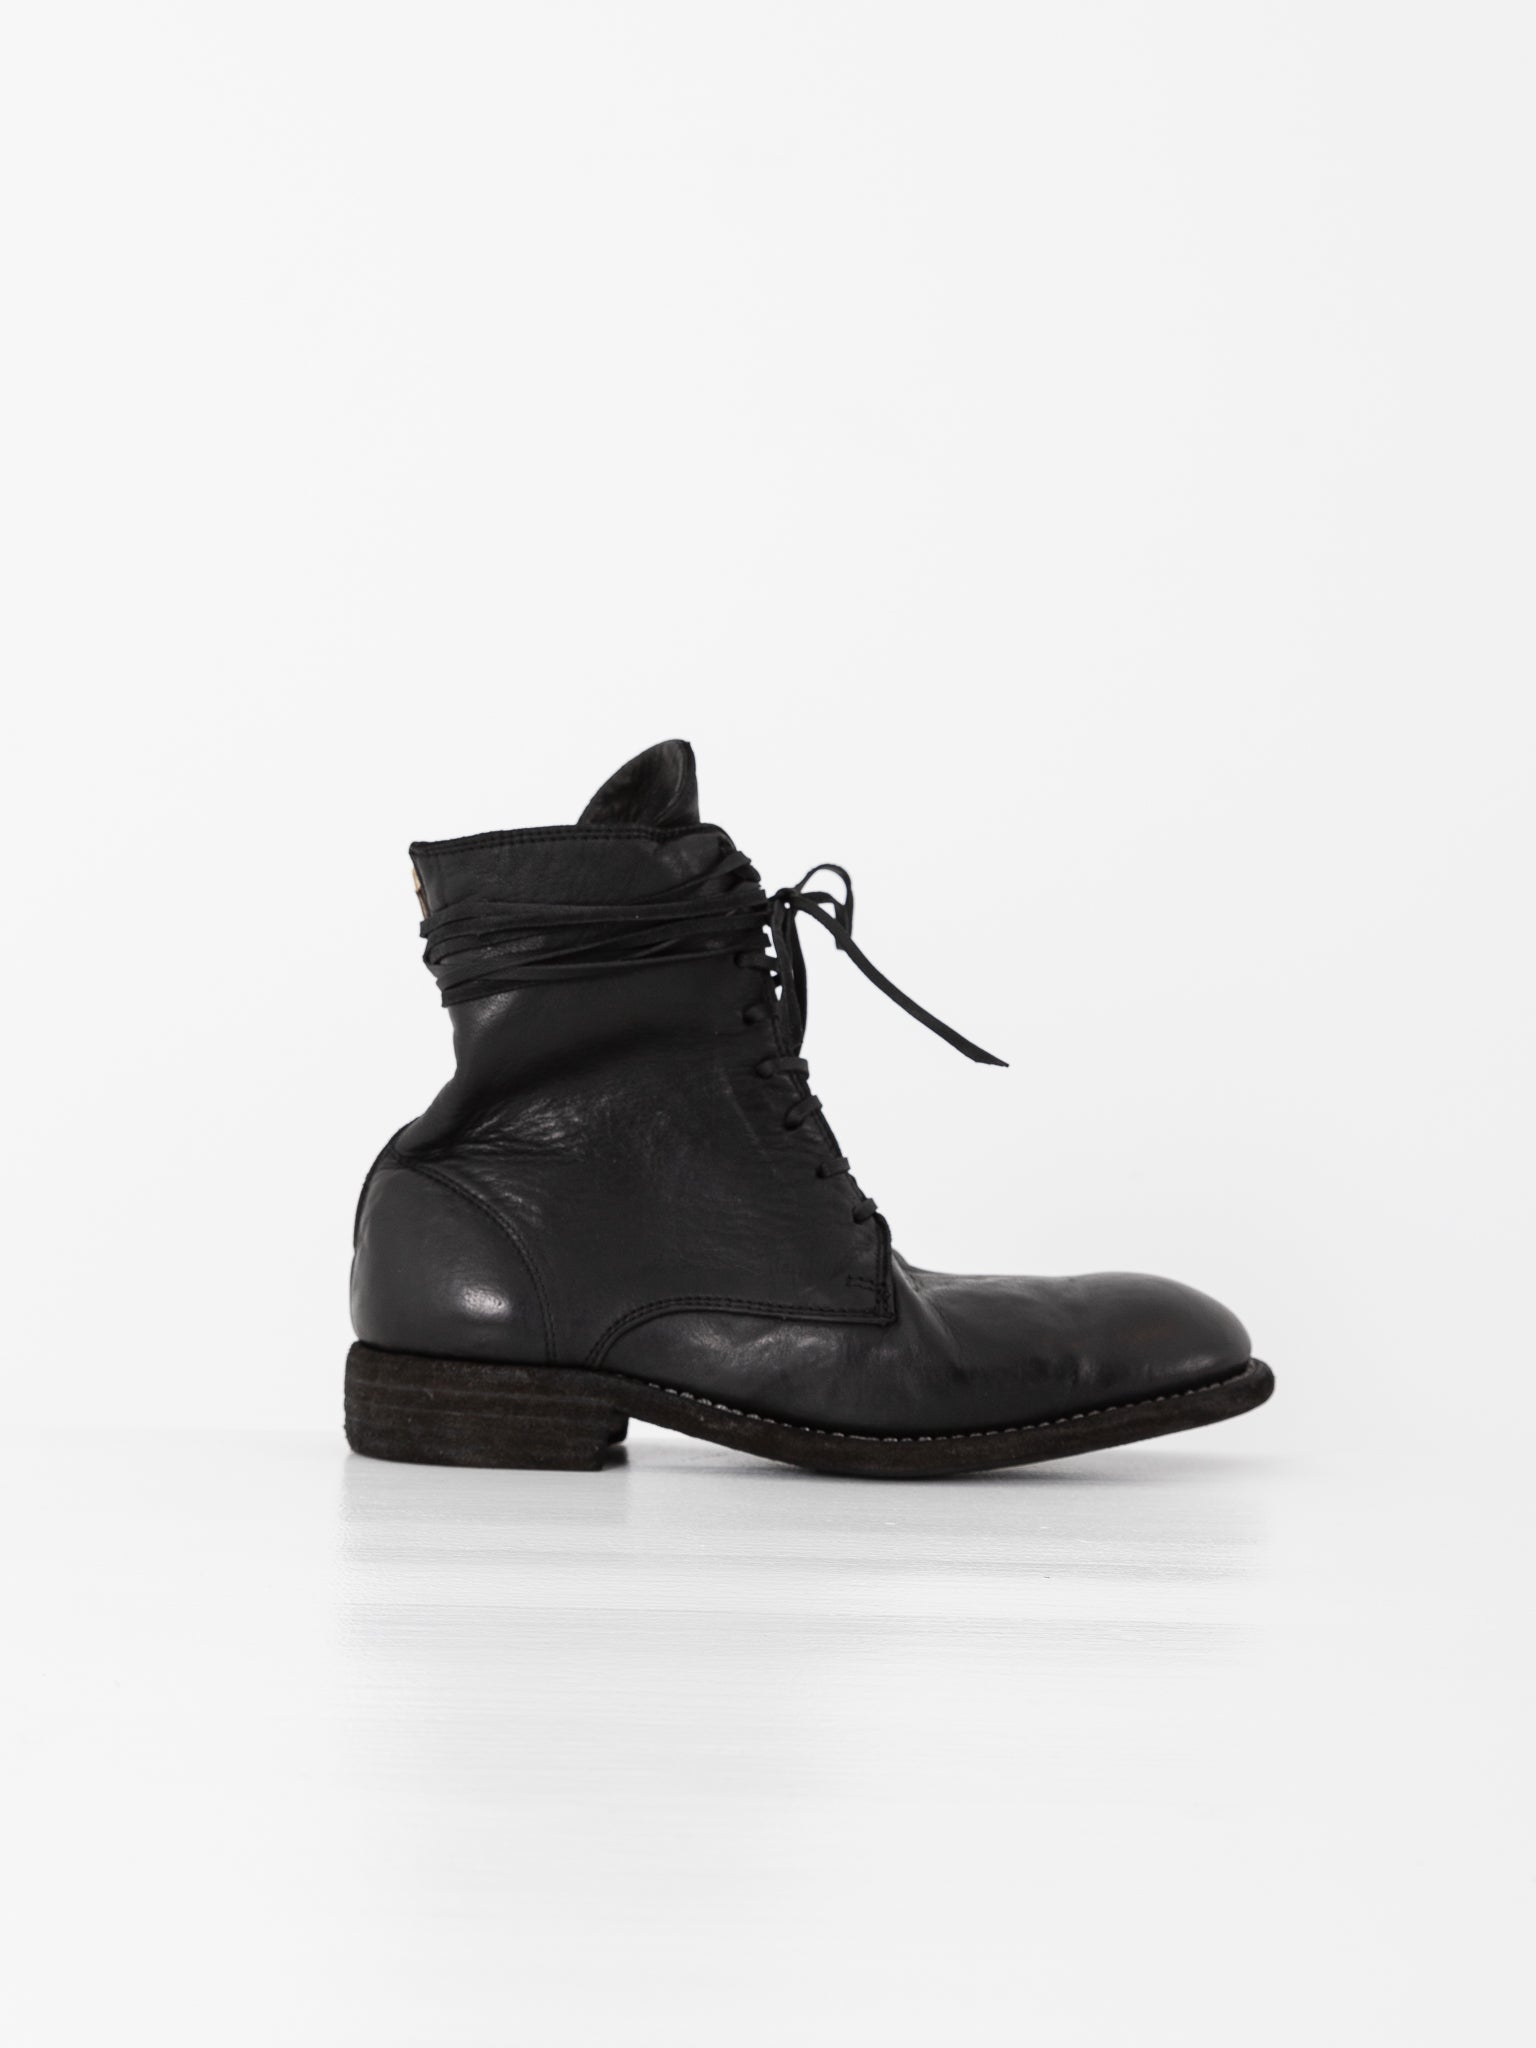 Guidi Front Tie/Back Zip Boot 995BZ, Black - Worthwhile